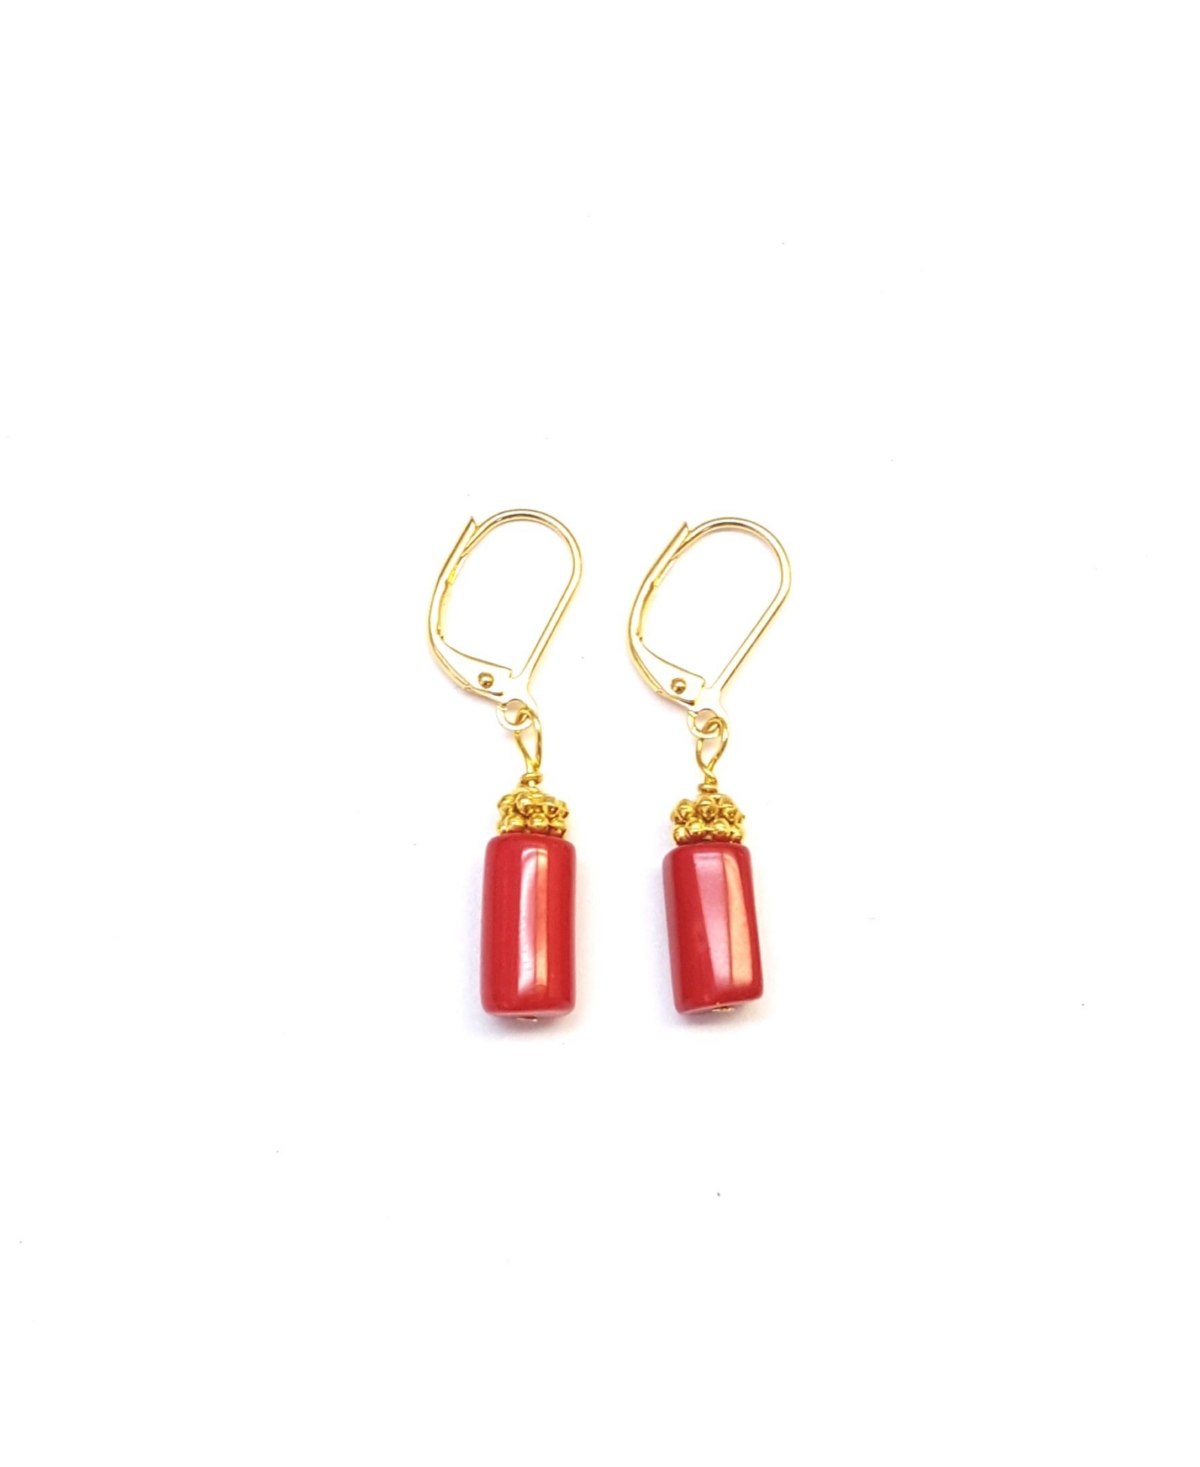 Women's Rouge Earrings with Red Beads - Gold-tone